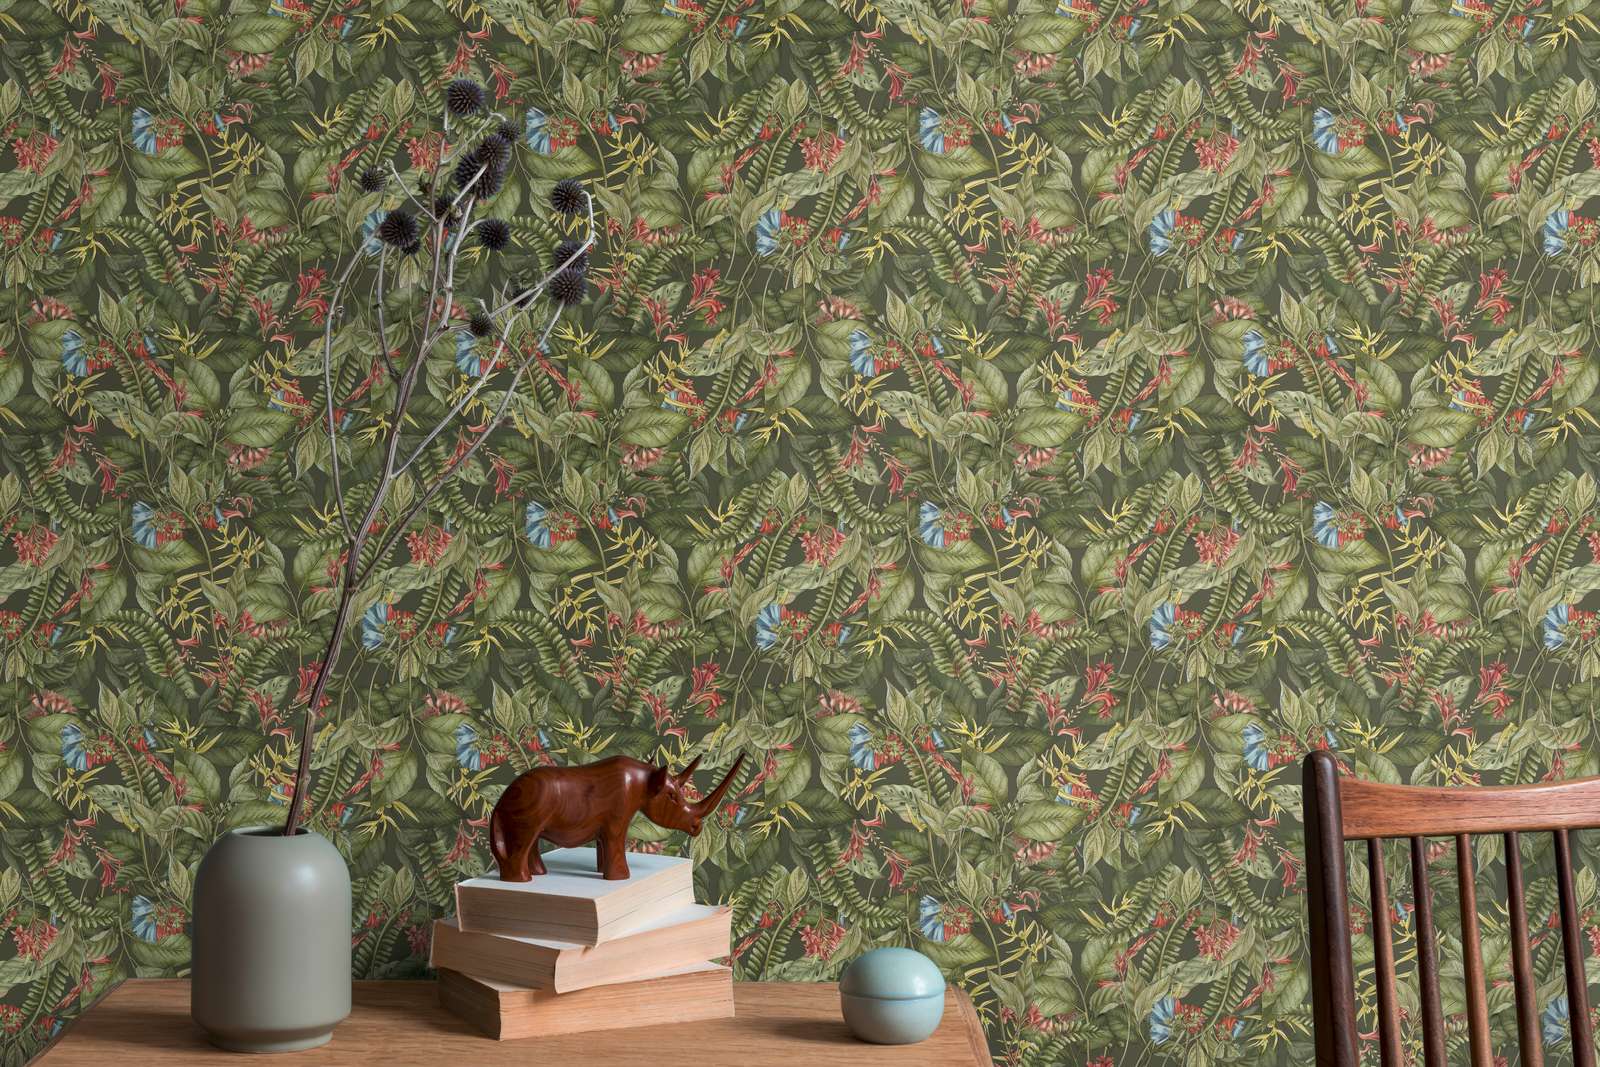             Wallpaper with leaves & flowers in floral style textured matt - green, dark green, red
        